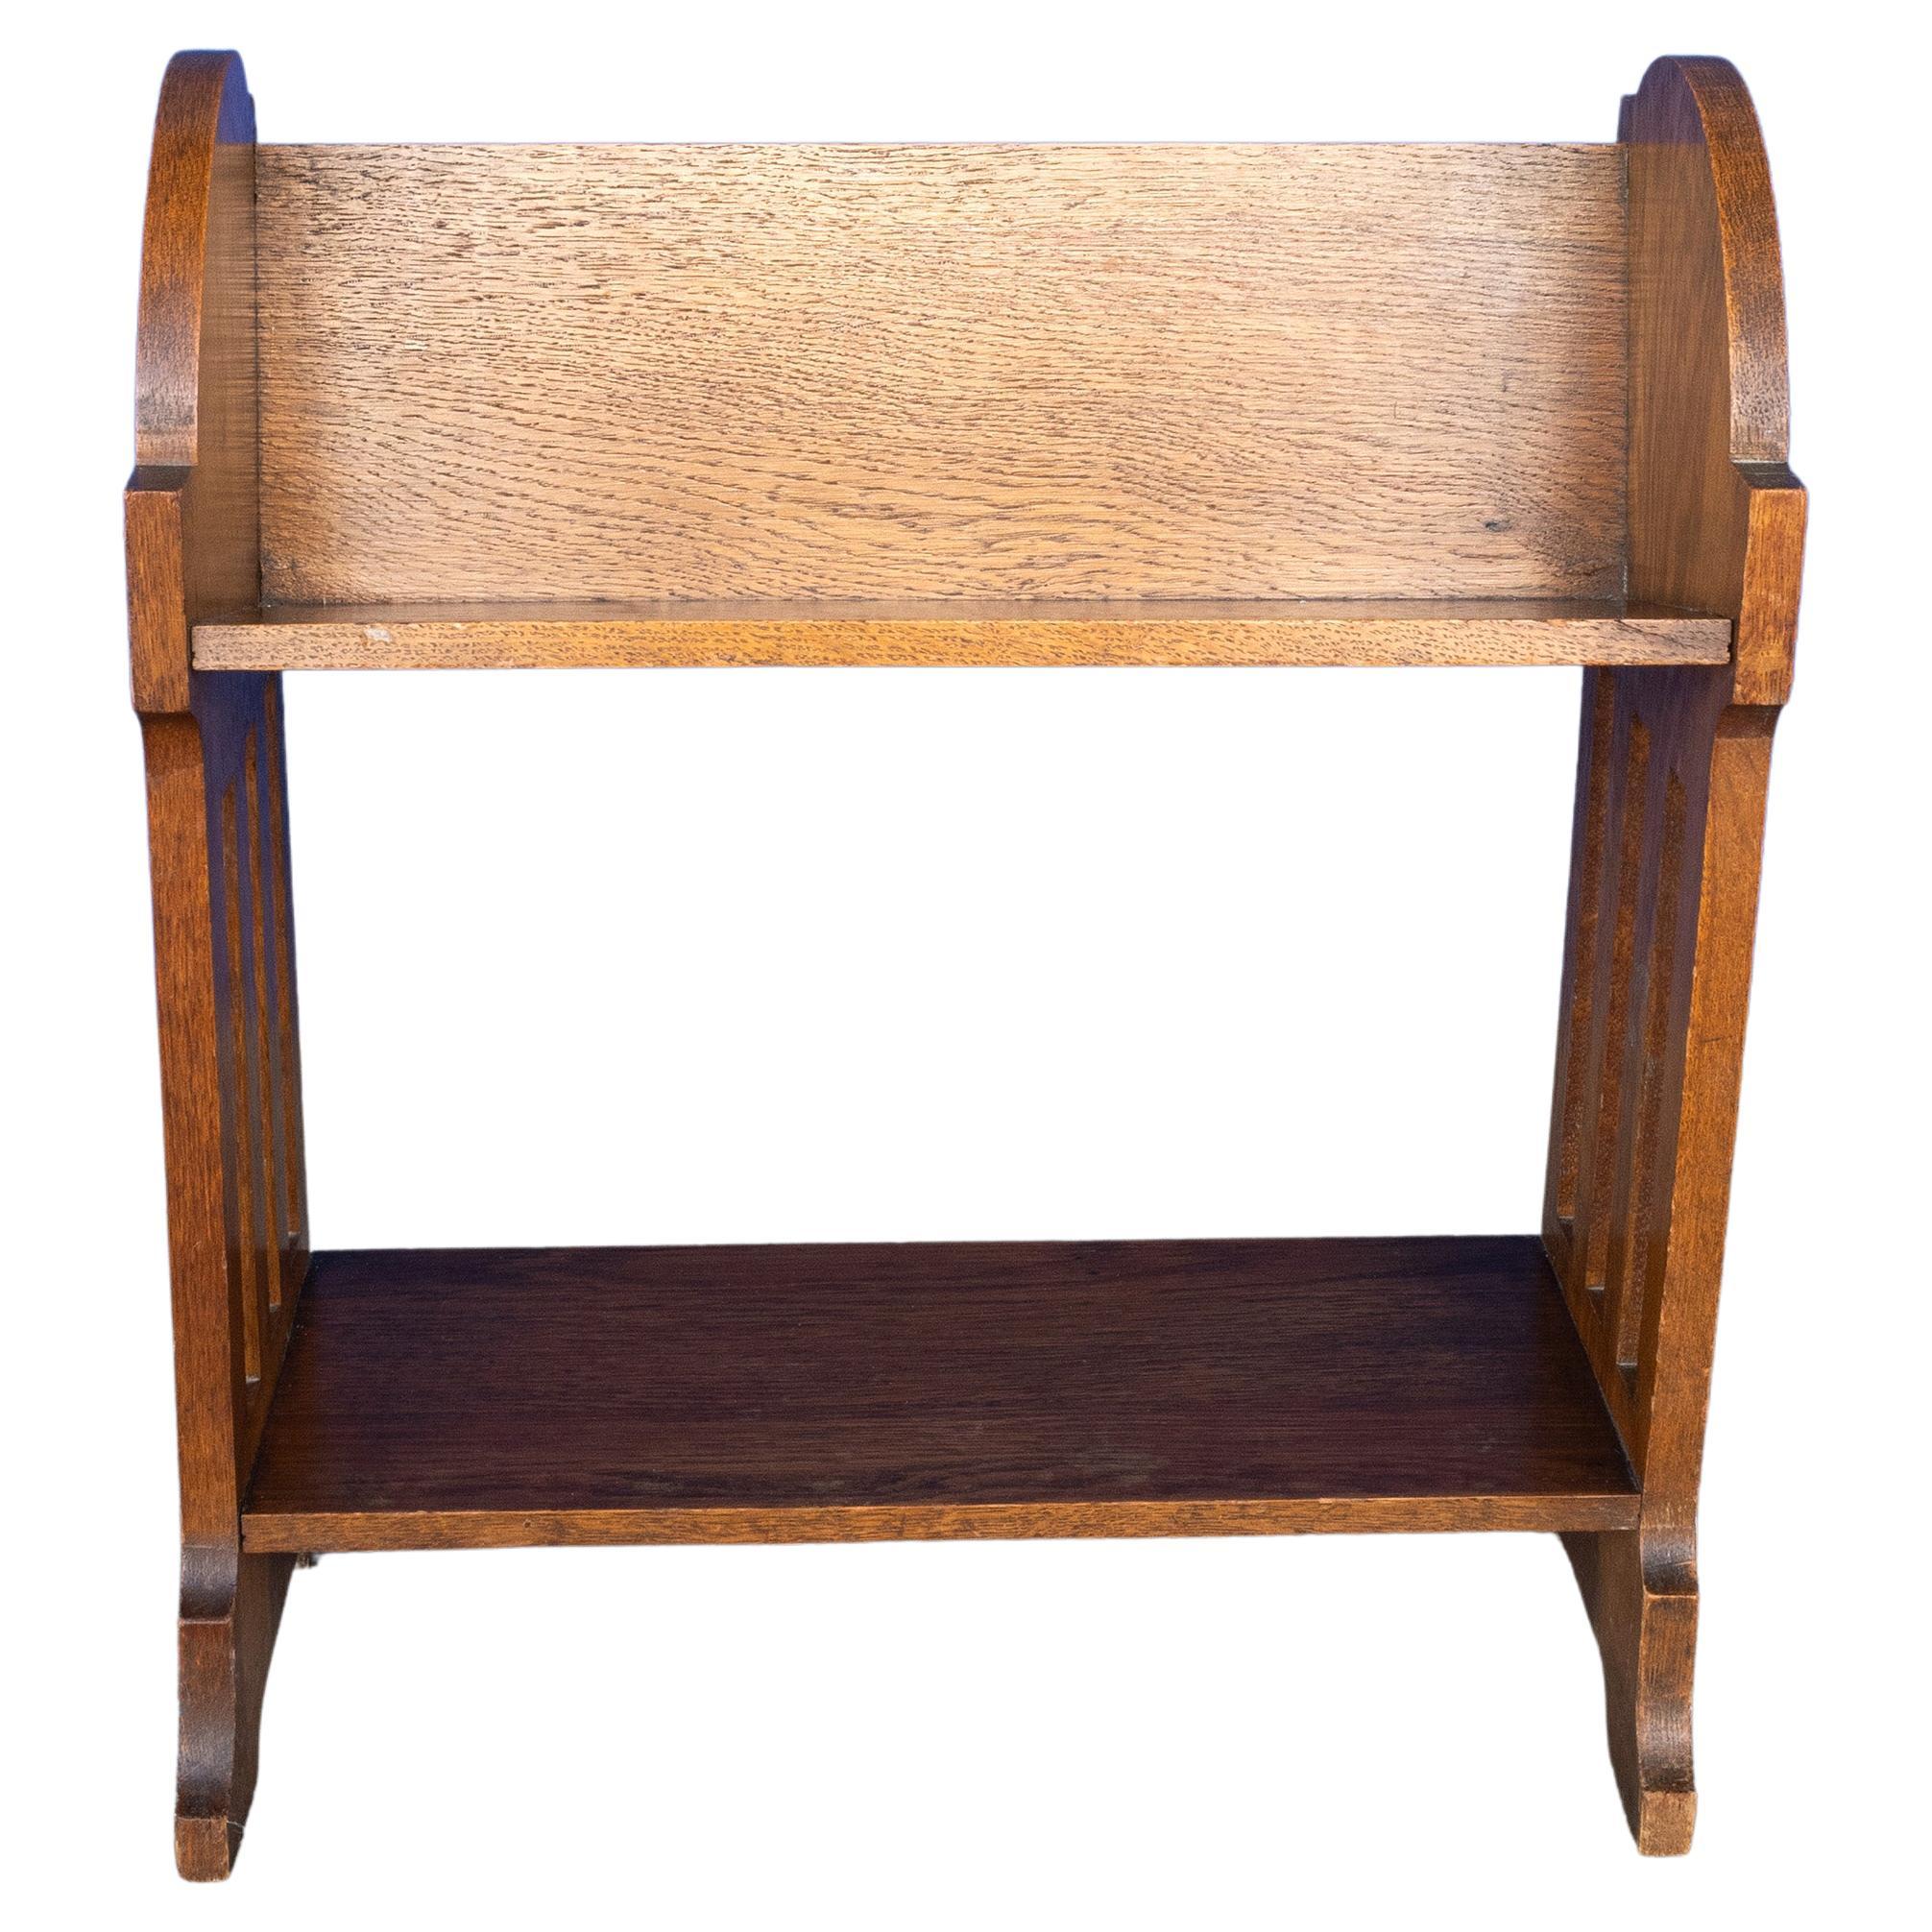 English Arts And Crafts Golden Oak Trough Table Top Bookcase 
C.1910
Attributed to Liberty Of London
In very good coindition commensurate of age. 